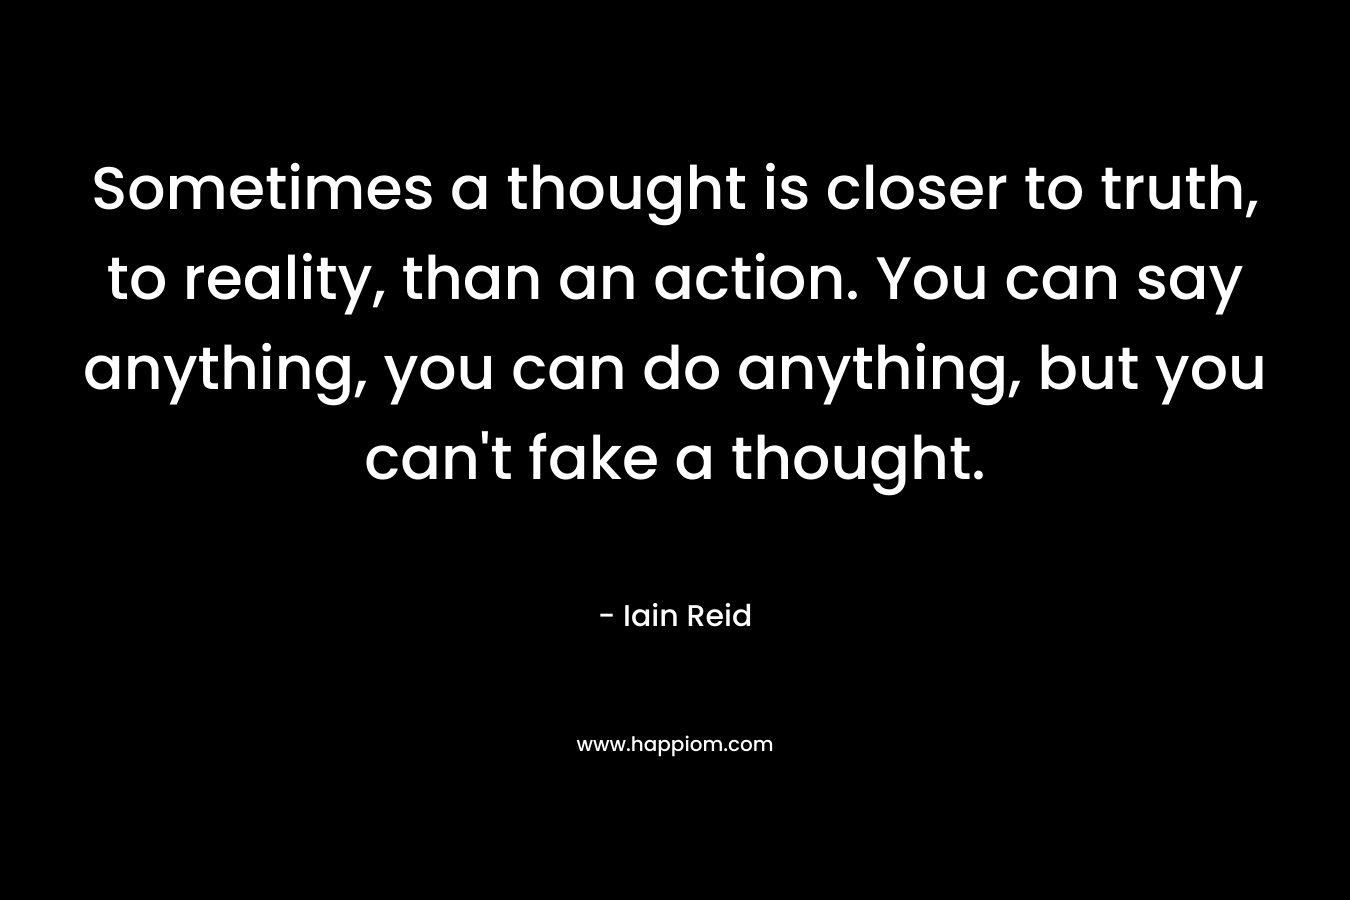 Sometimes a thought is closer to truth, to reality, than an action. You can say anything, you can do anything, but you can't fake a thought.